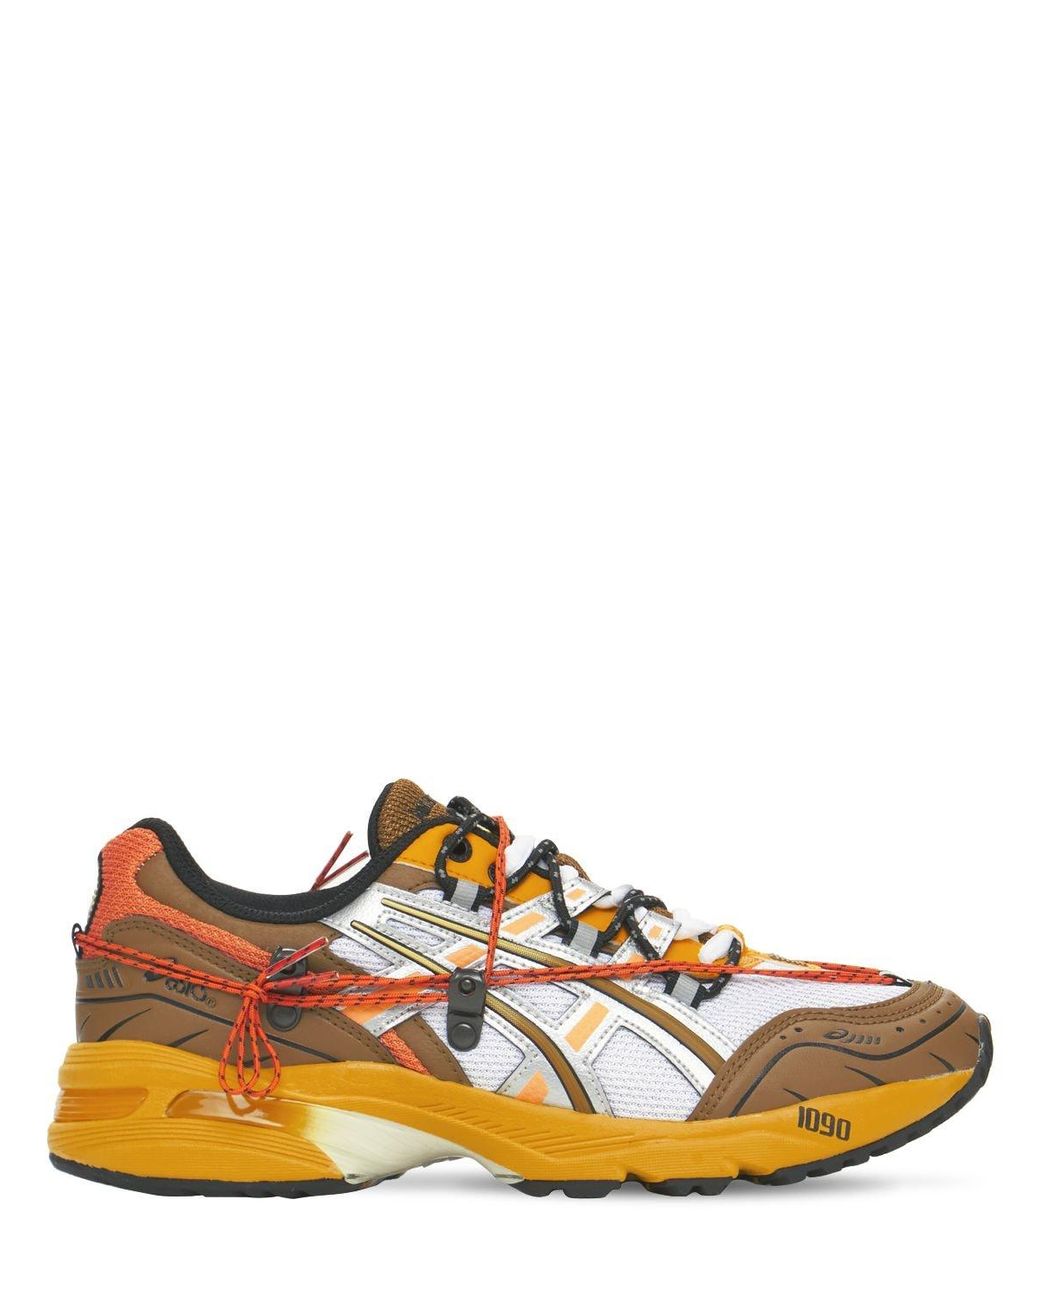 Asics Synthetic Anderson Bell Gel 1090 Sneakers for Men - Lyst